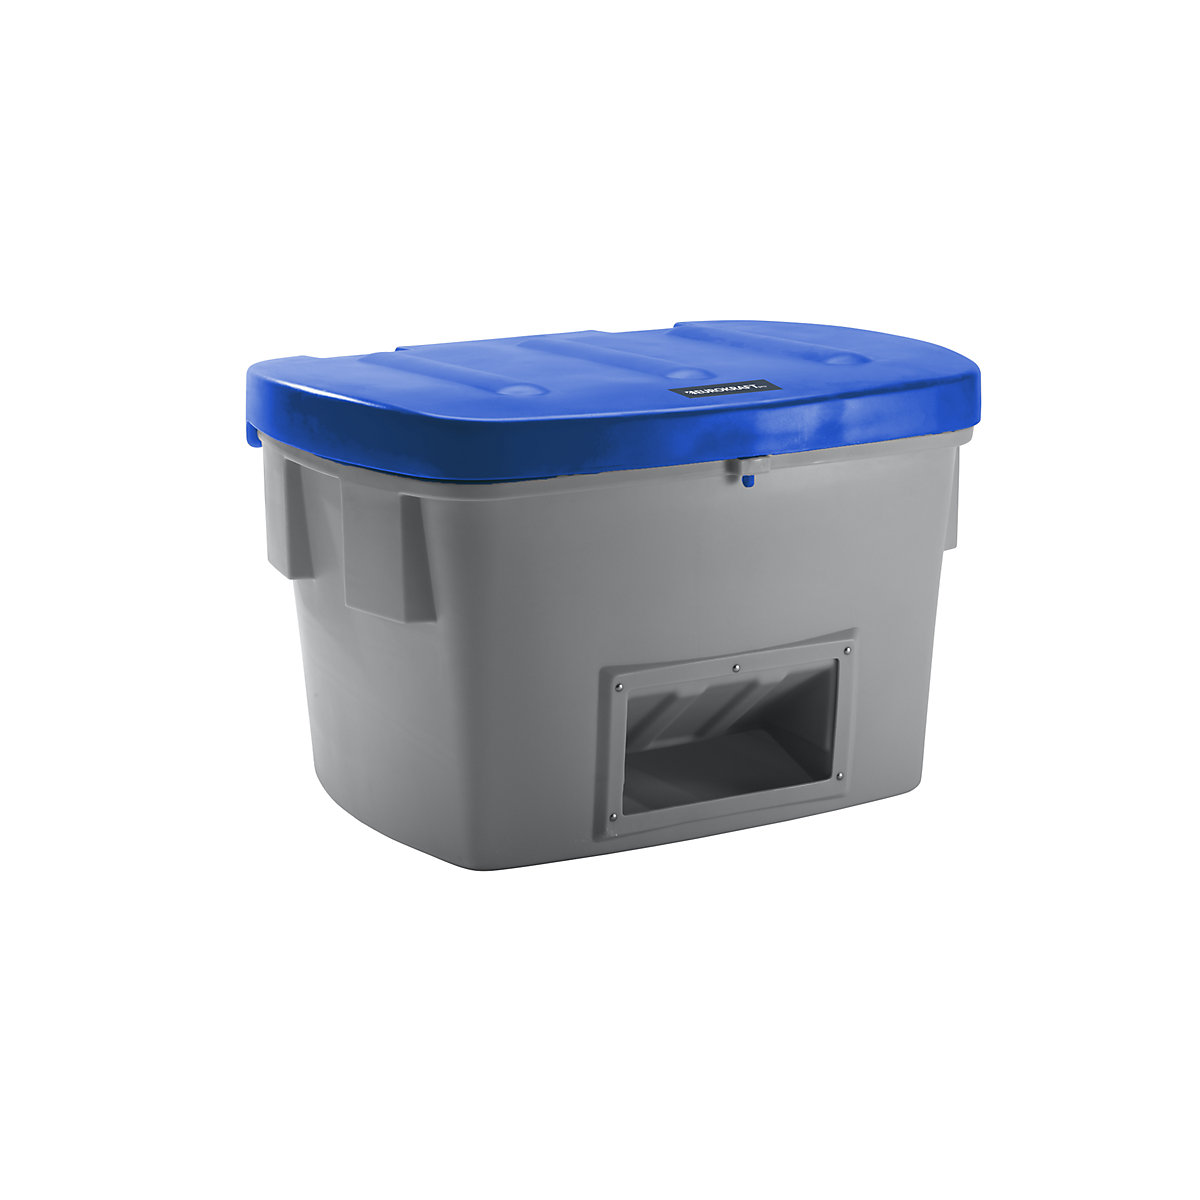 Universal / grit container – eurokraft pro, with dispenser opening, 700 l, blue lid-8